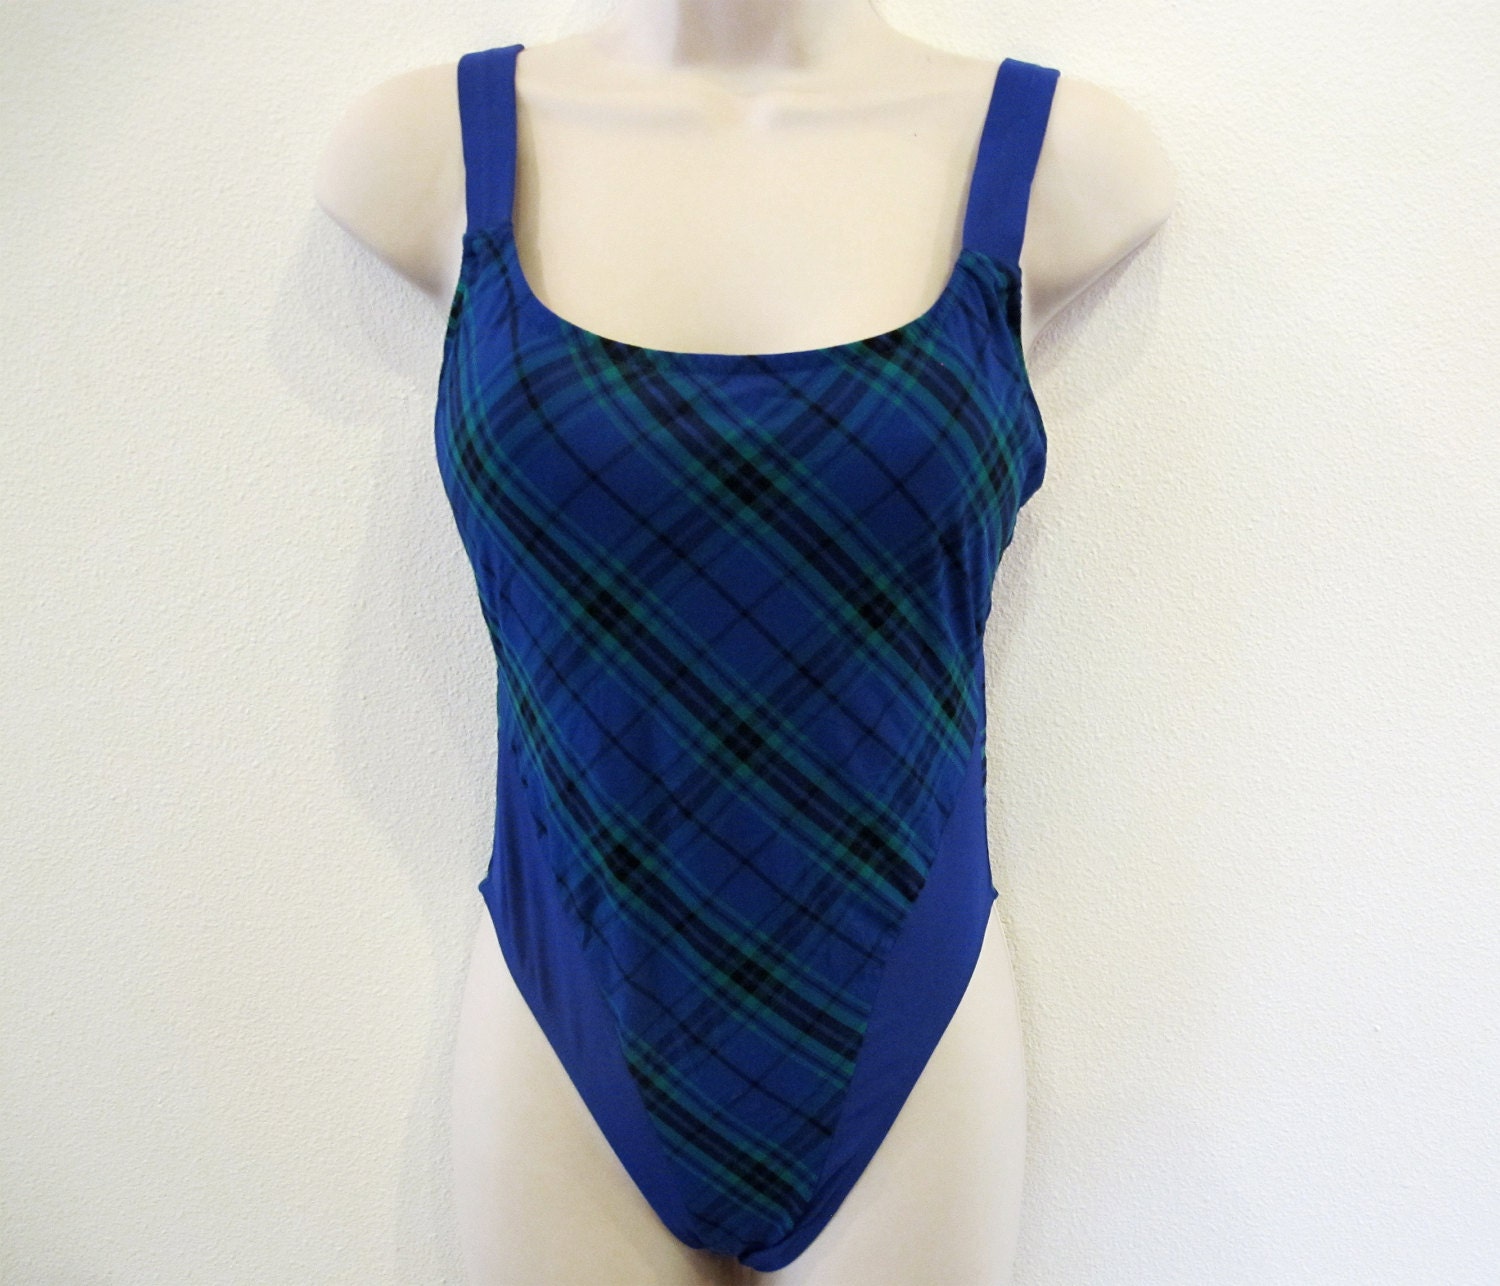 Vintage Blue Swimsuit 80s Bathing Suit Small by StraylightVintage